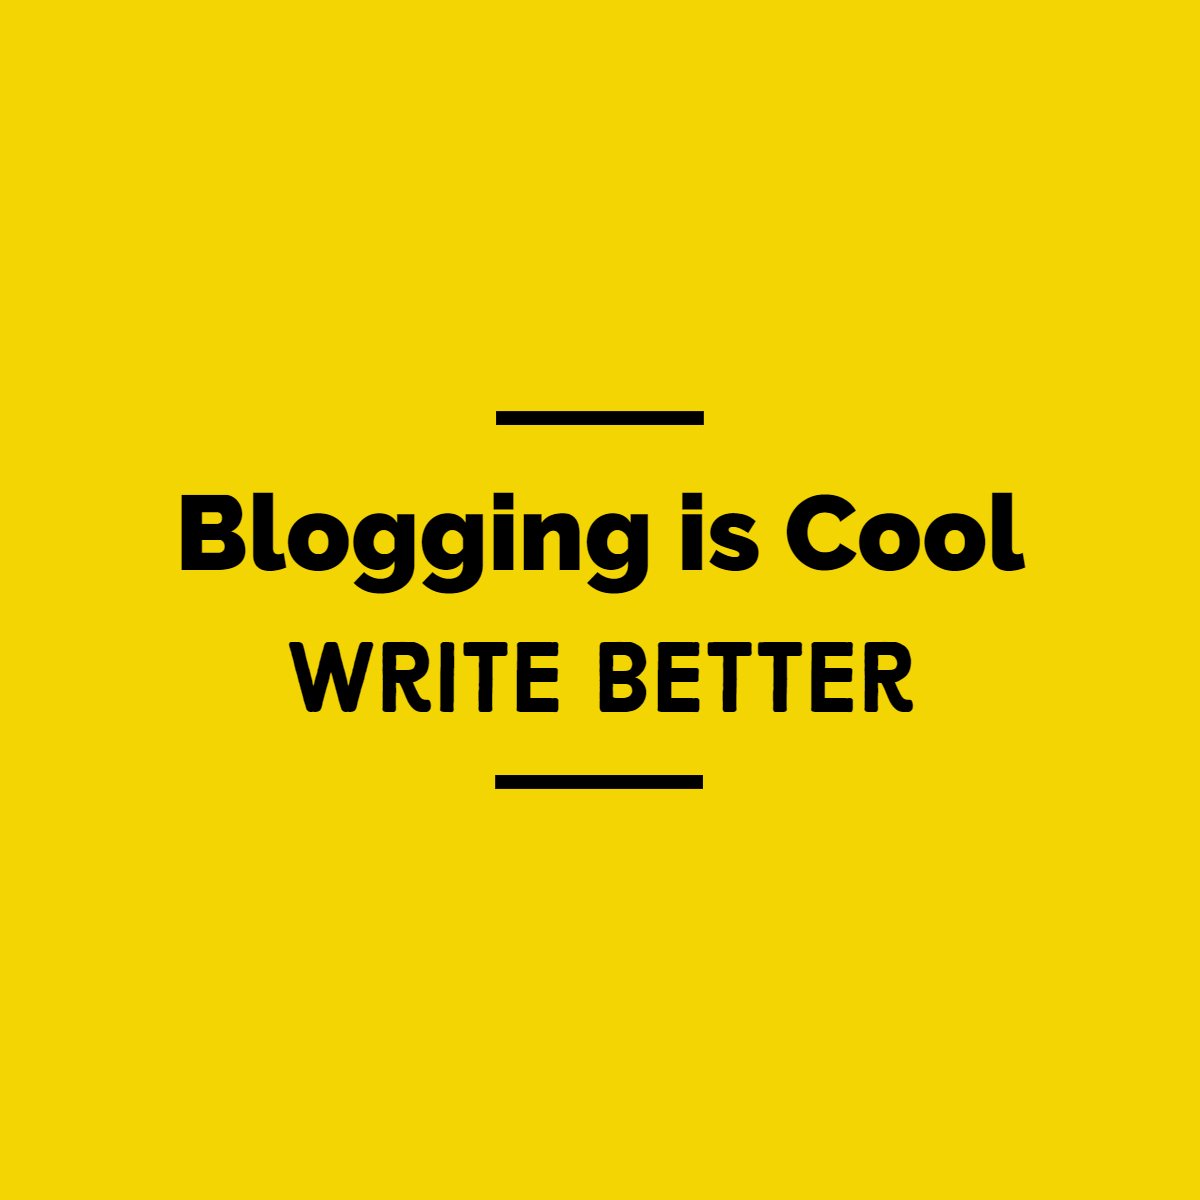 bloggingiscool.com is all about helping bloggers become better at blogging